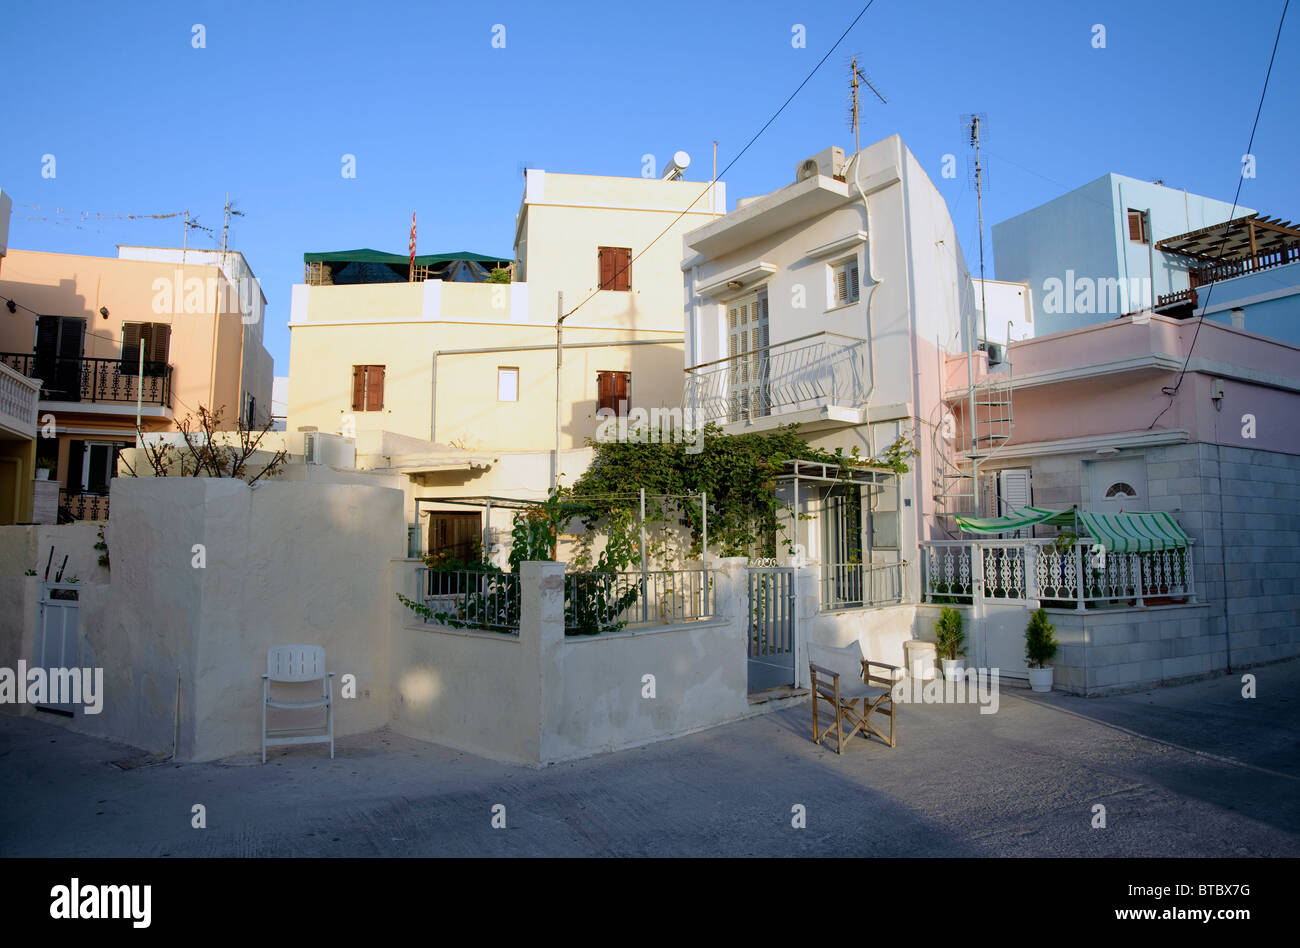 Early morning scene in Ermoupolis, on the Greek island of Syros, situated in the Aegean Sea Stock Photo